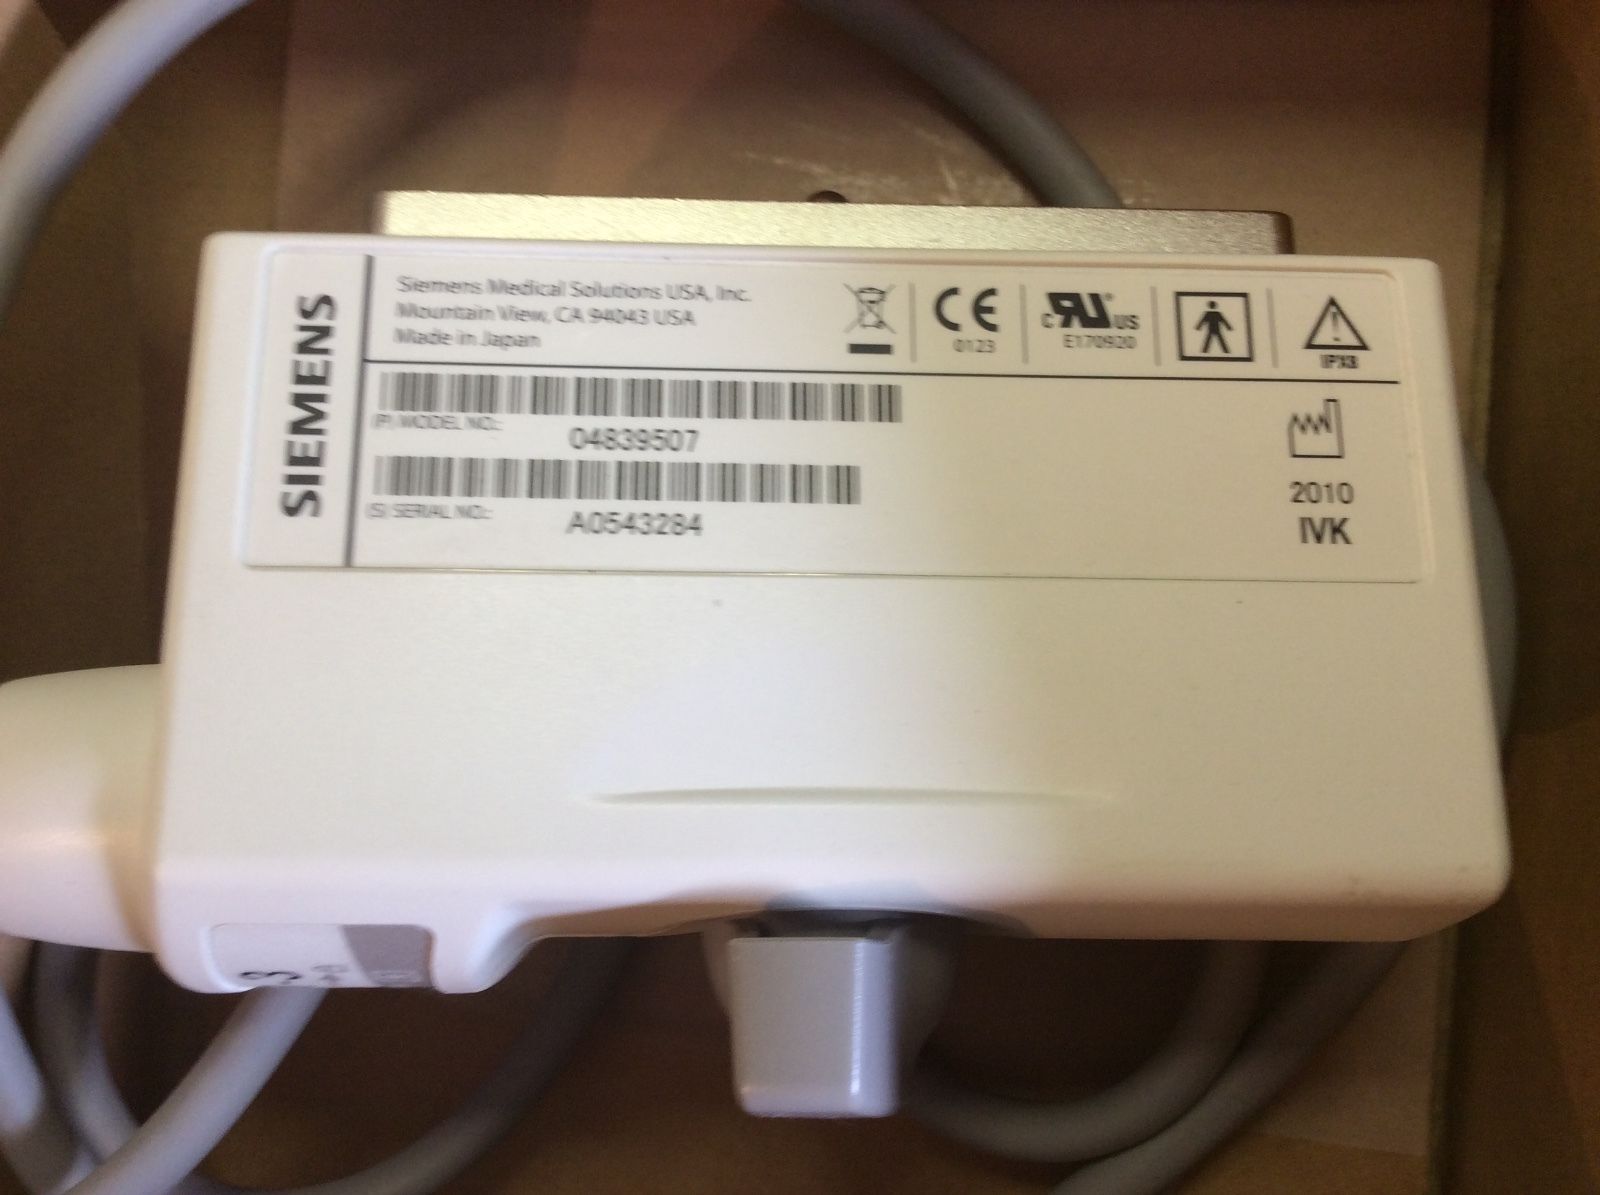 Siemens Antares VF7-3 DL-4 Ultrasound Transducer Probe - 2D Linear 3-7Mhz NEW DIAGNOSTIC ULTRASOUND MACHINES FOR SALE